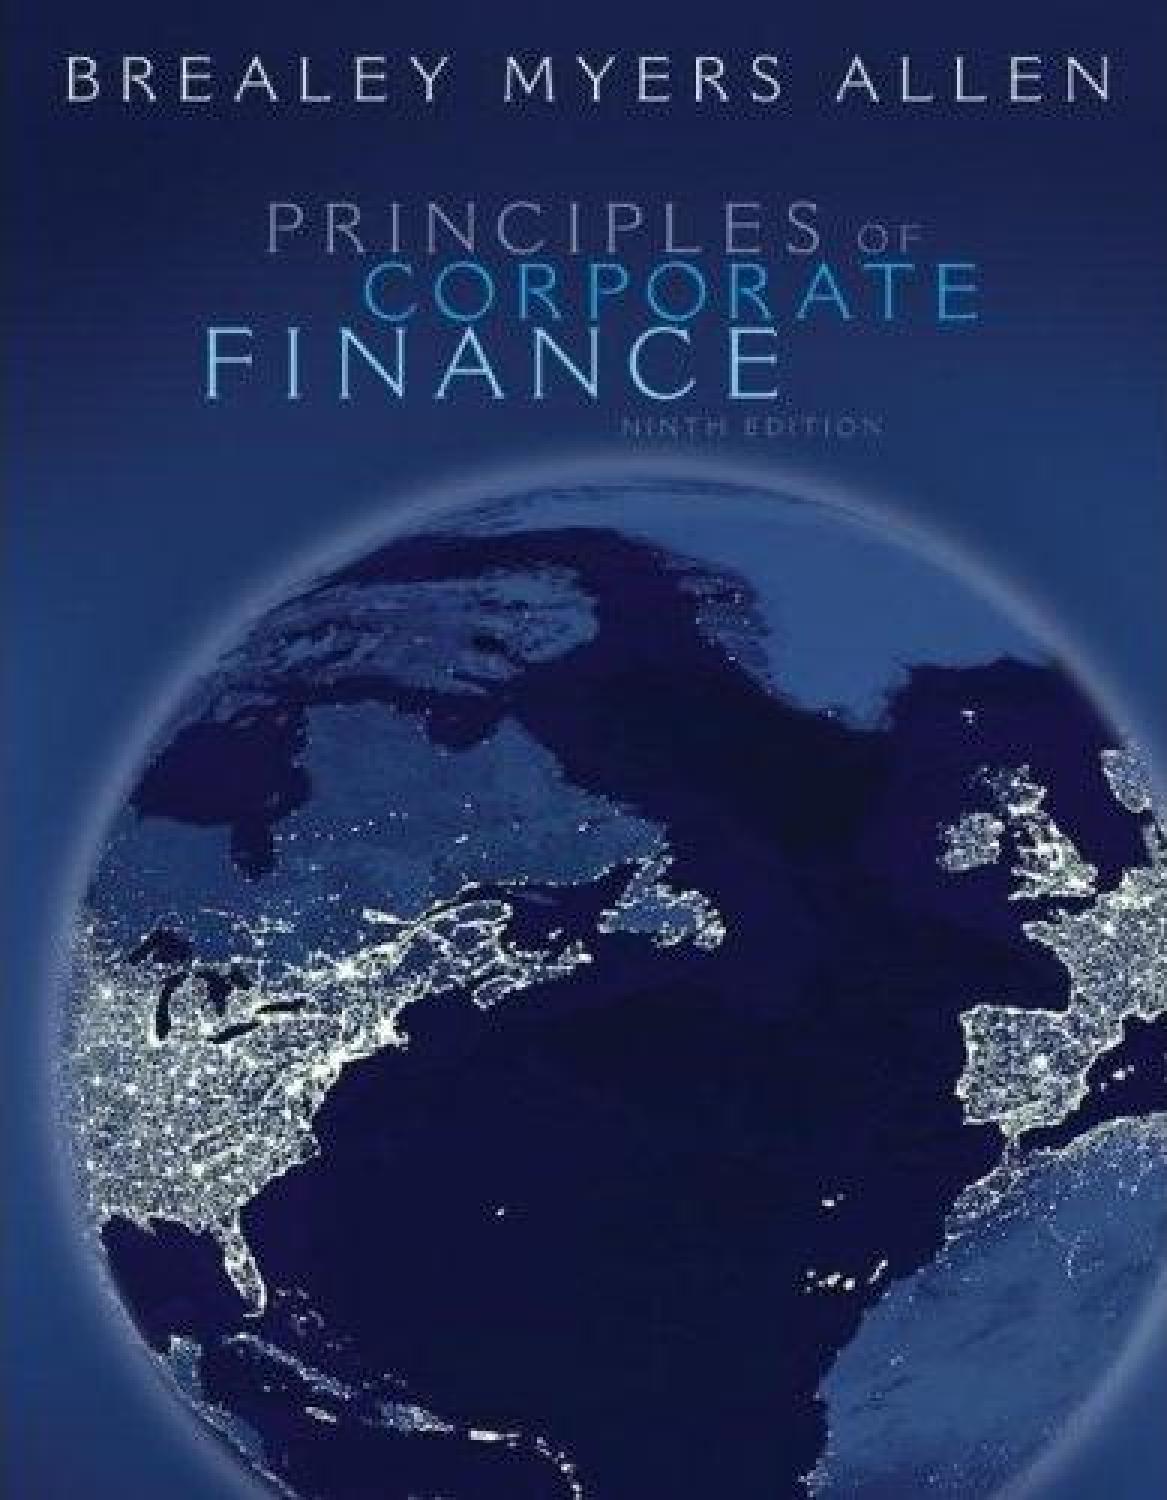 Principles of Corporate Finance, 9th edition